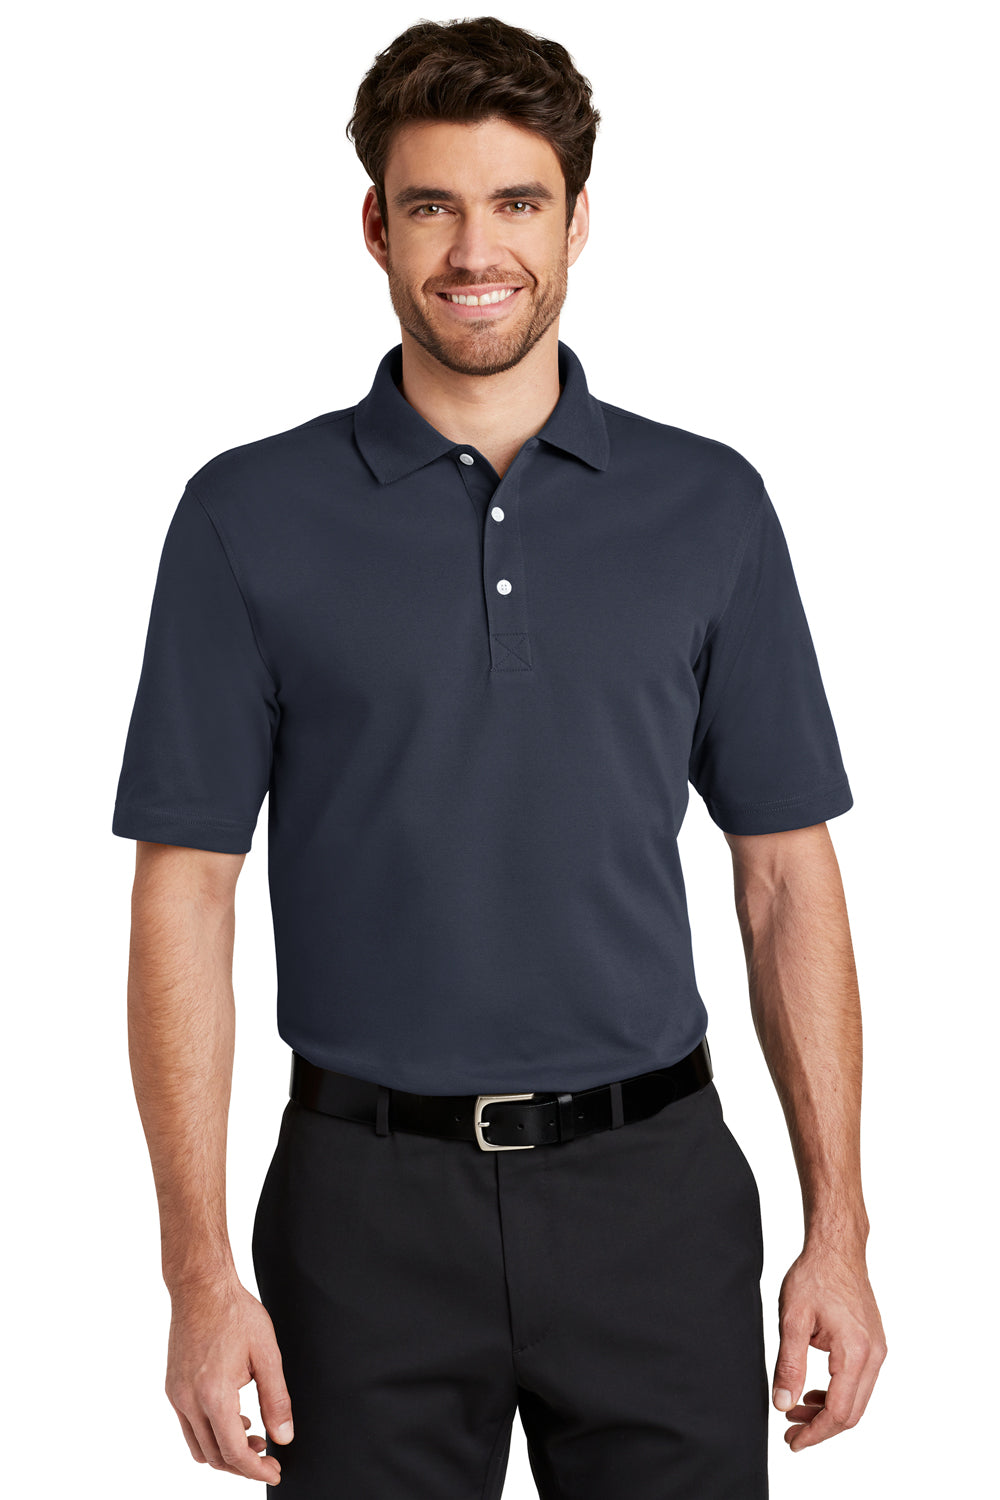 Port Authority K455 Mens Rapid Dry Moisture Wicking Short Sleeve Polo Shirt Navy Blue Front